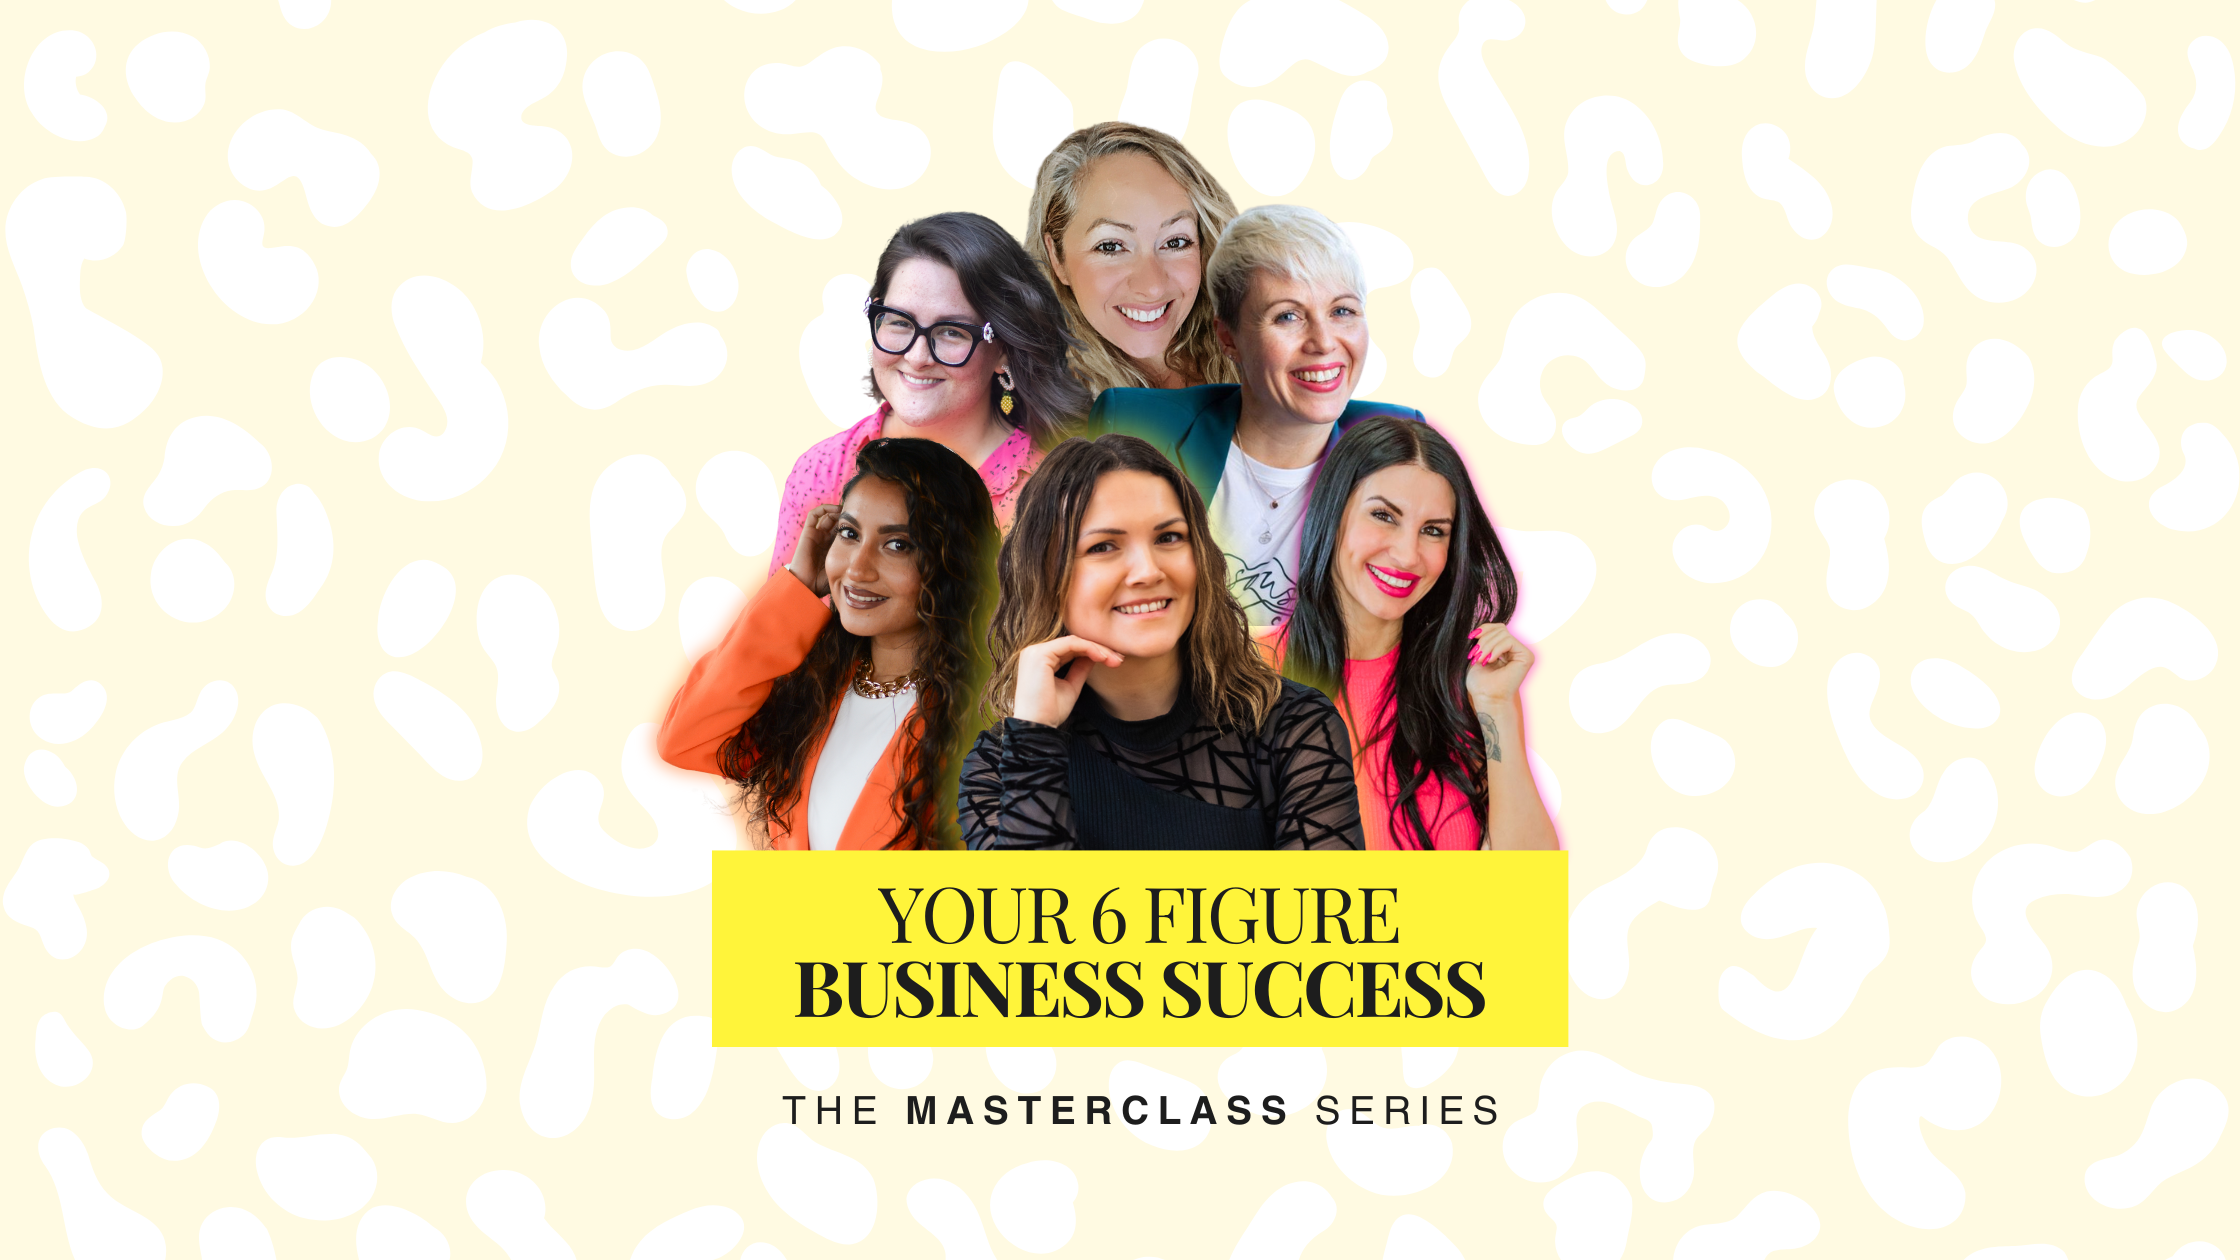 YOUR 6 FIGURE BUSINESS SUCCESS the masterclass series